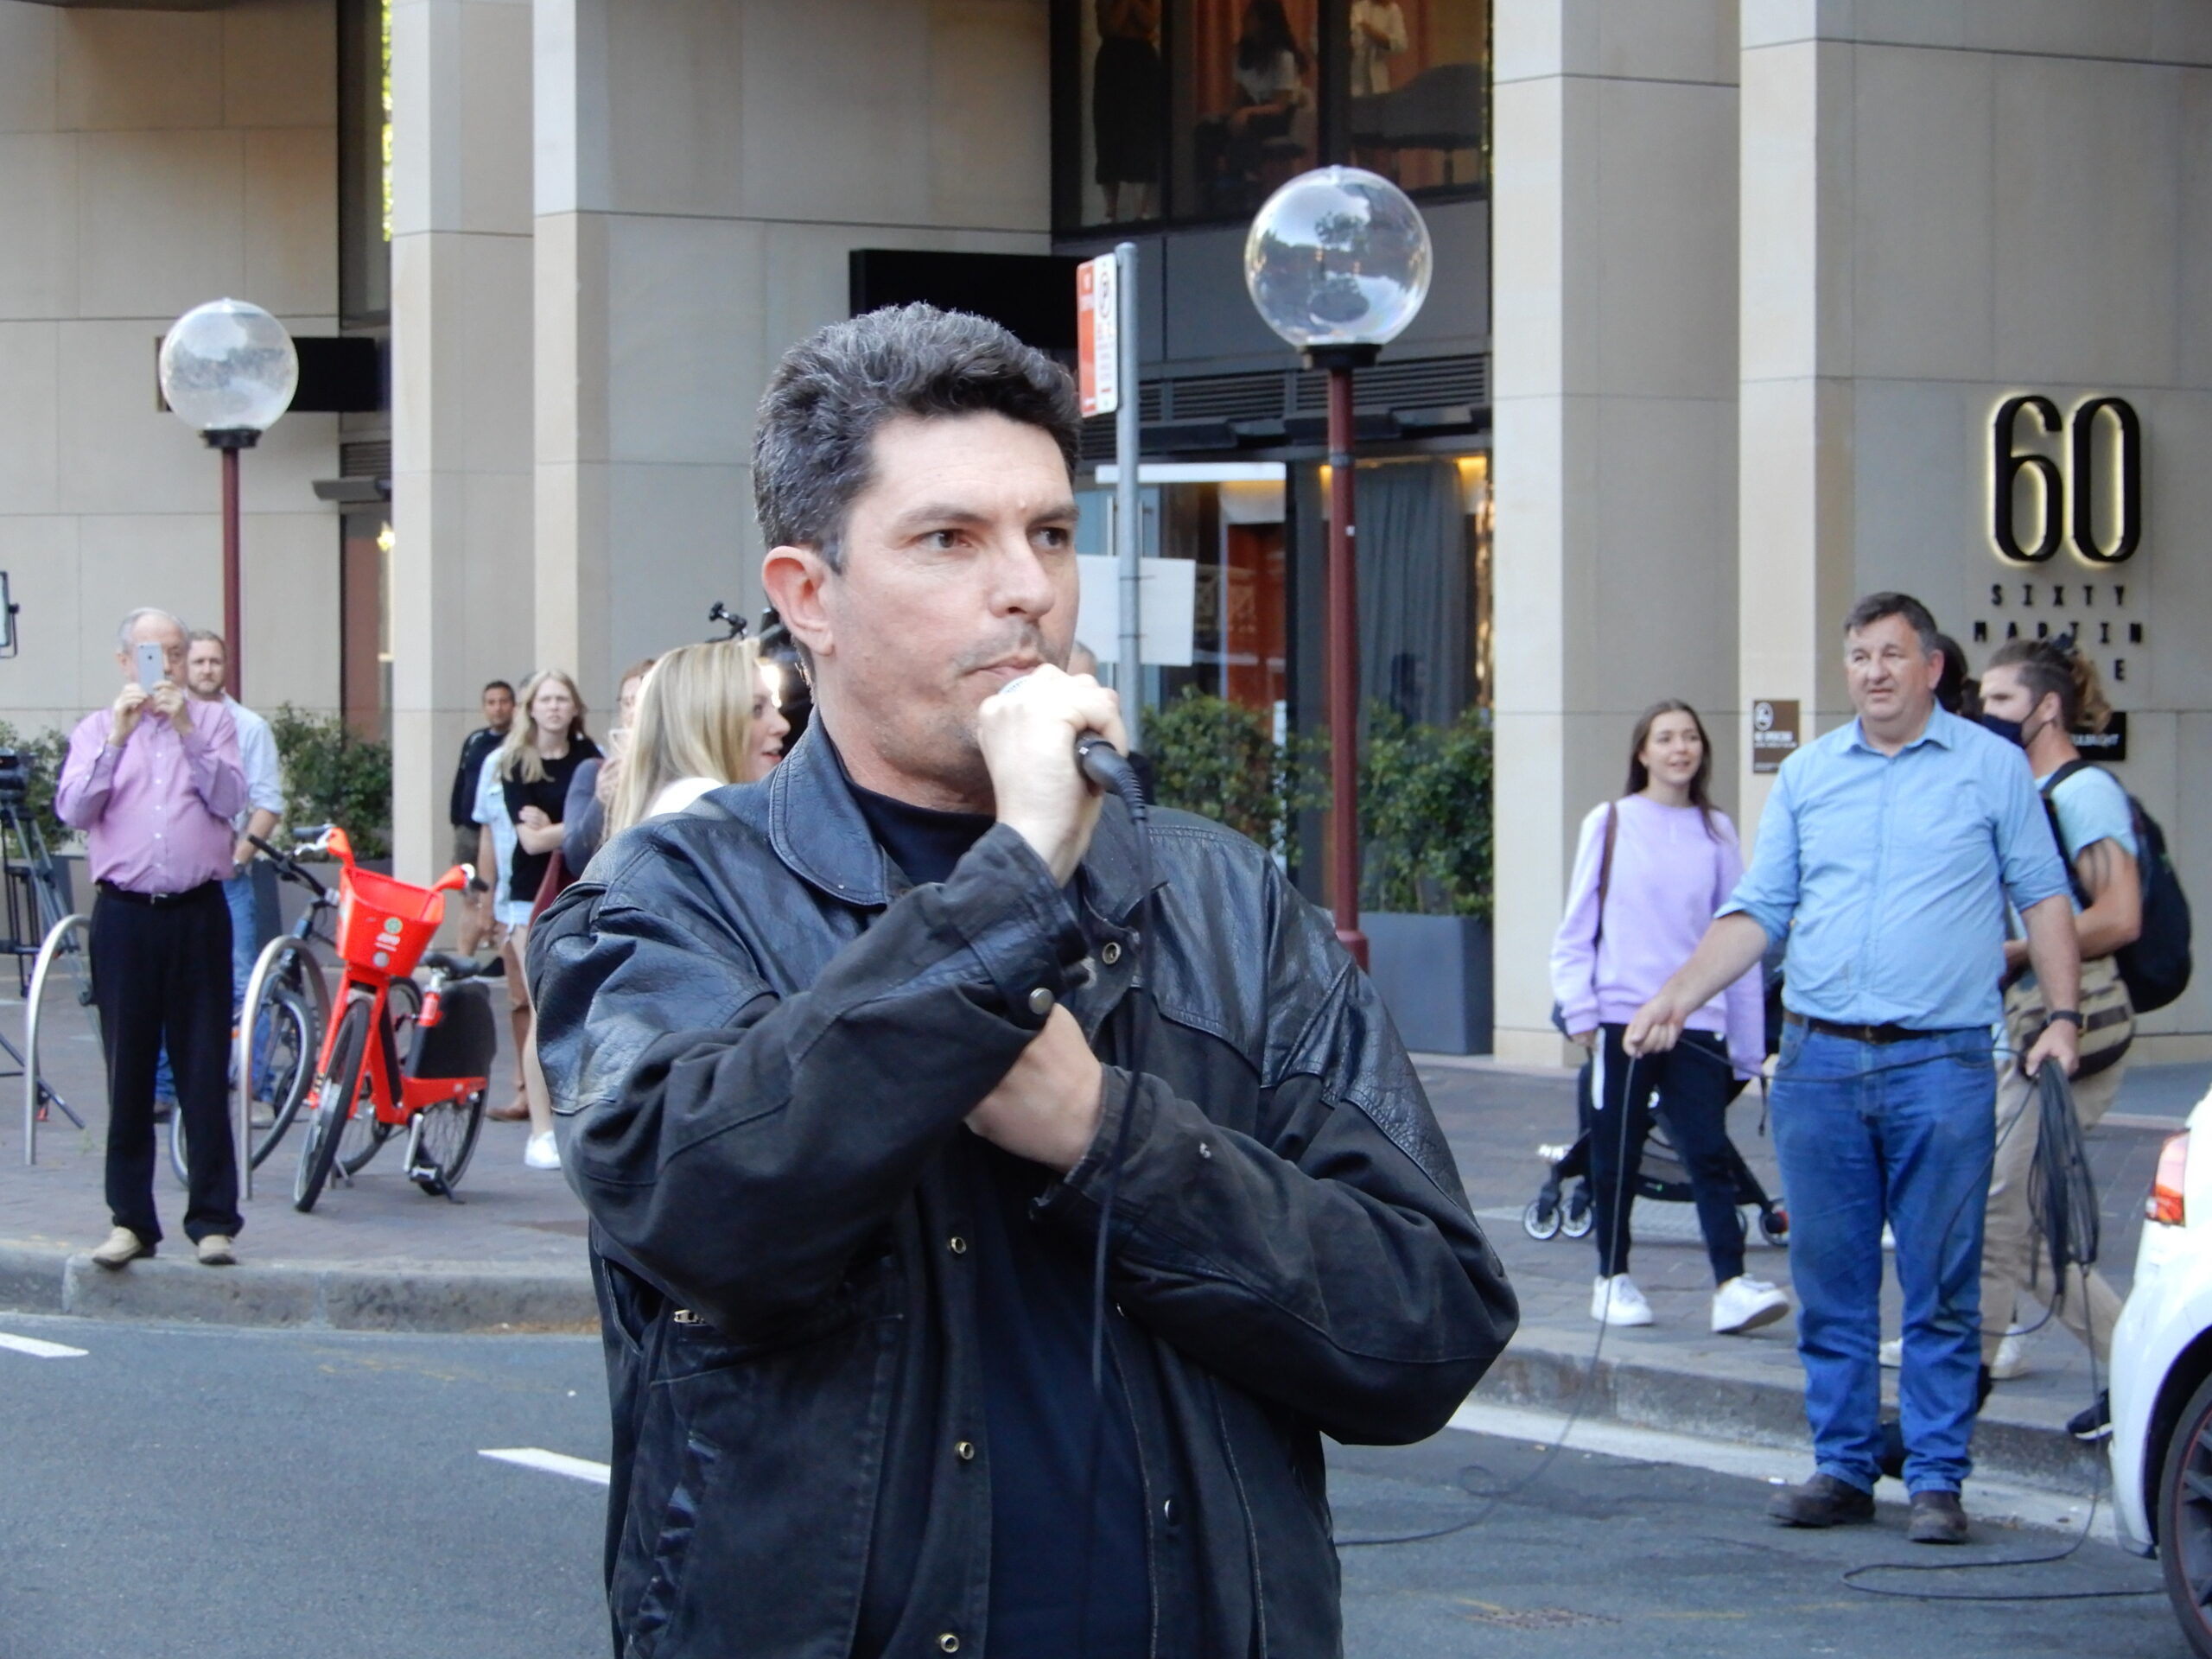 The government is in the grips of the corporations, says Ludlam